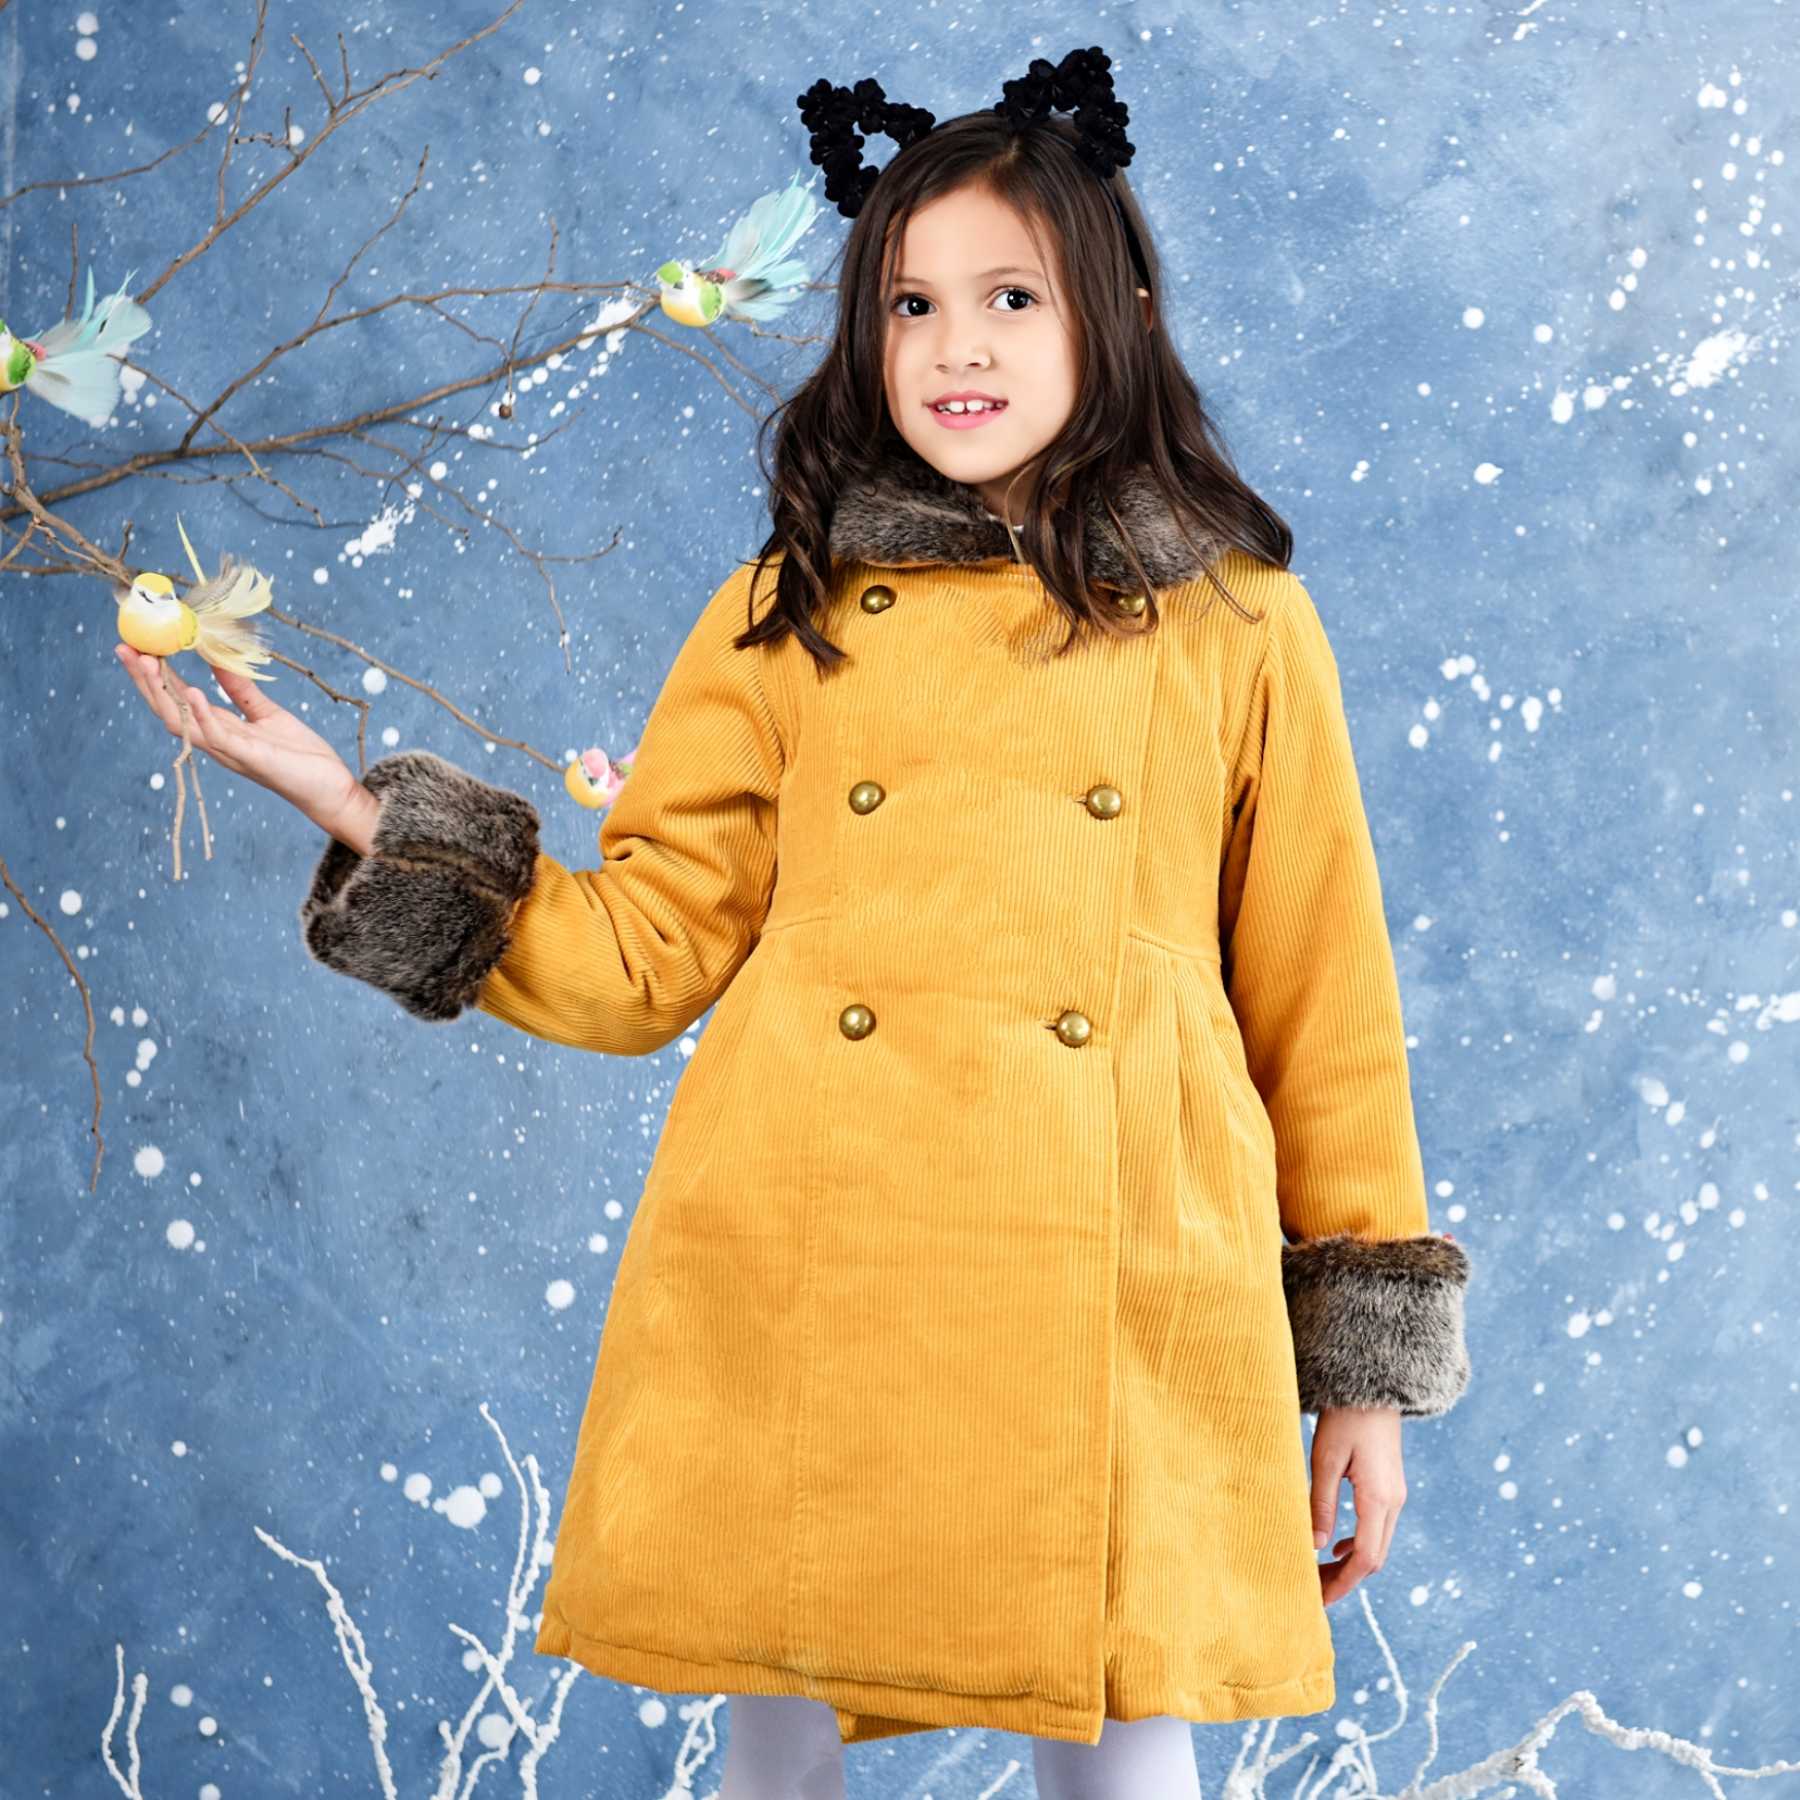 Yellow velvet coat with brown taupe faux fur collar for girls and young women from the children's fashion brand LA FAUTE A VOLTAIRE